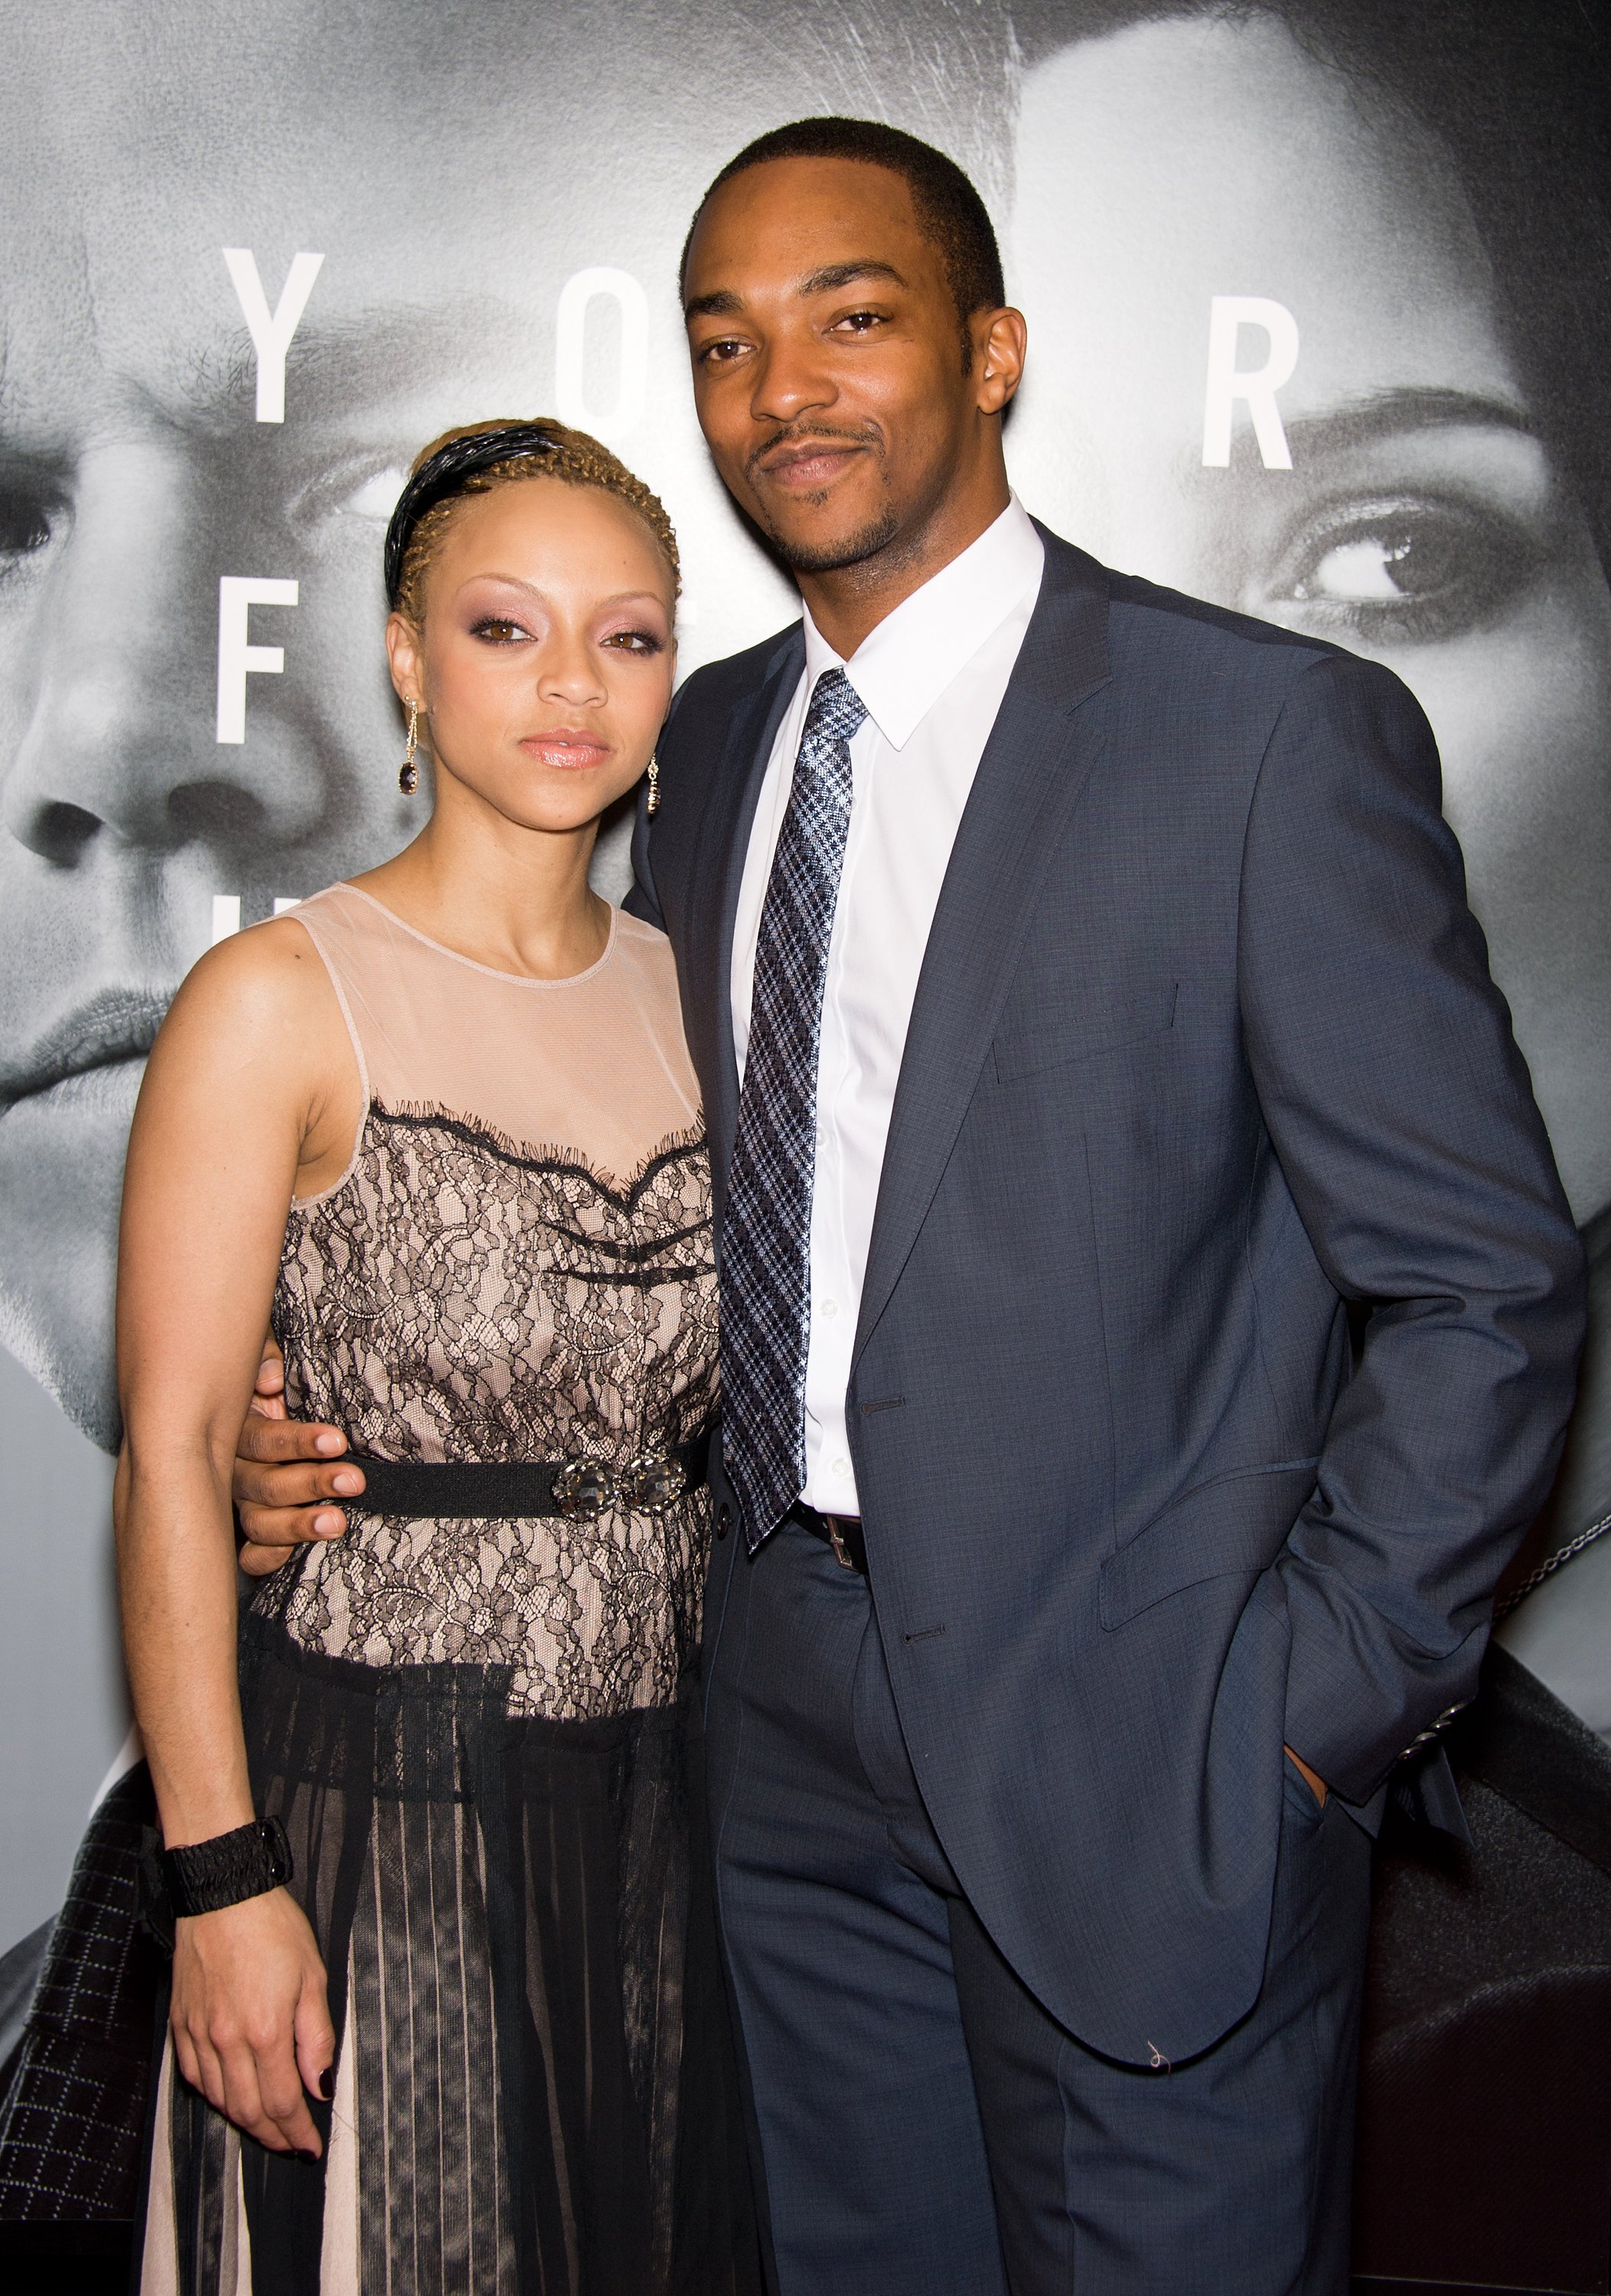 Anthony Mackie and Sheletta Chapital attend the premiere of "The Adjustment Bureau" on February 14, 2011, in New York City. | Source: Getty Images